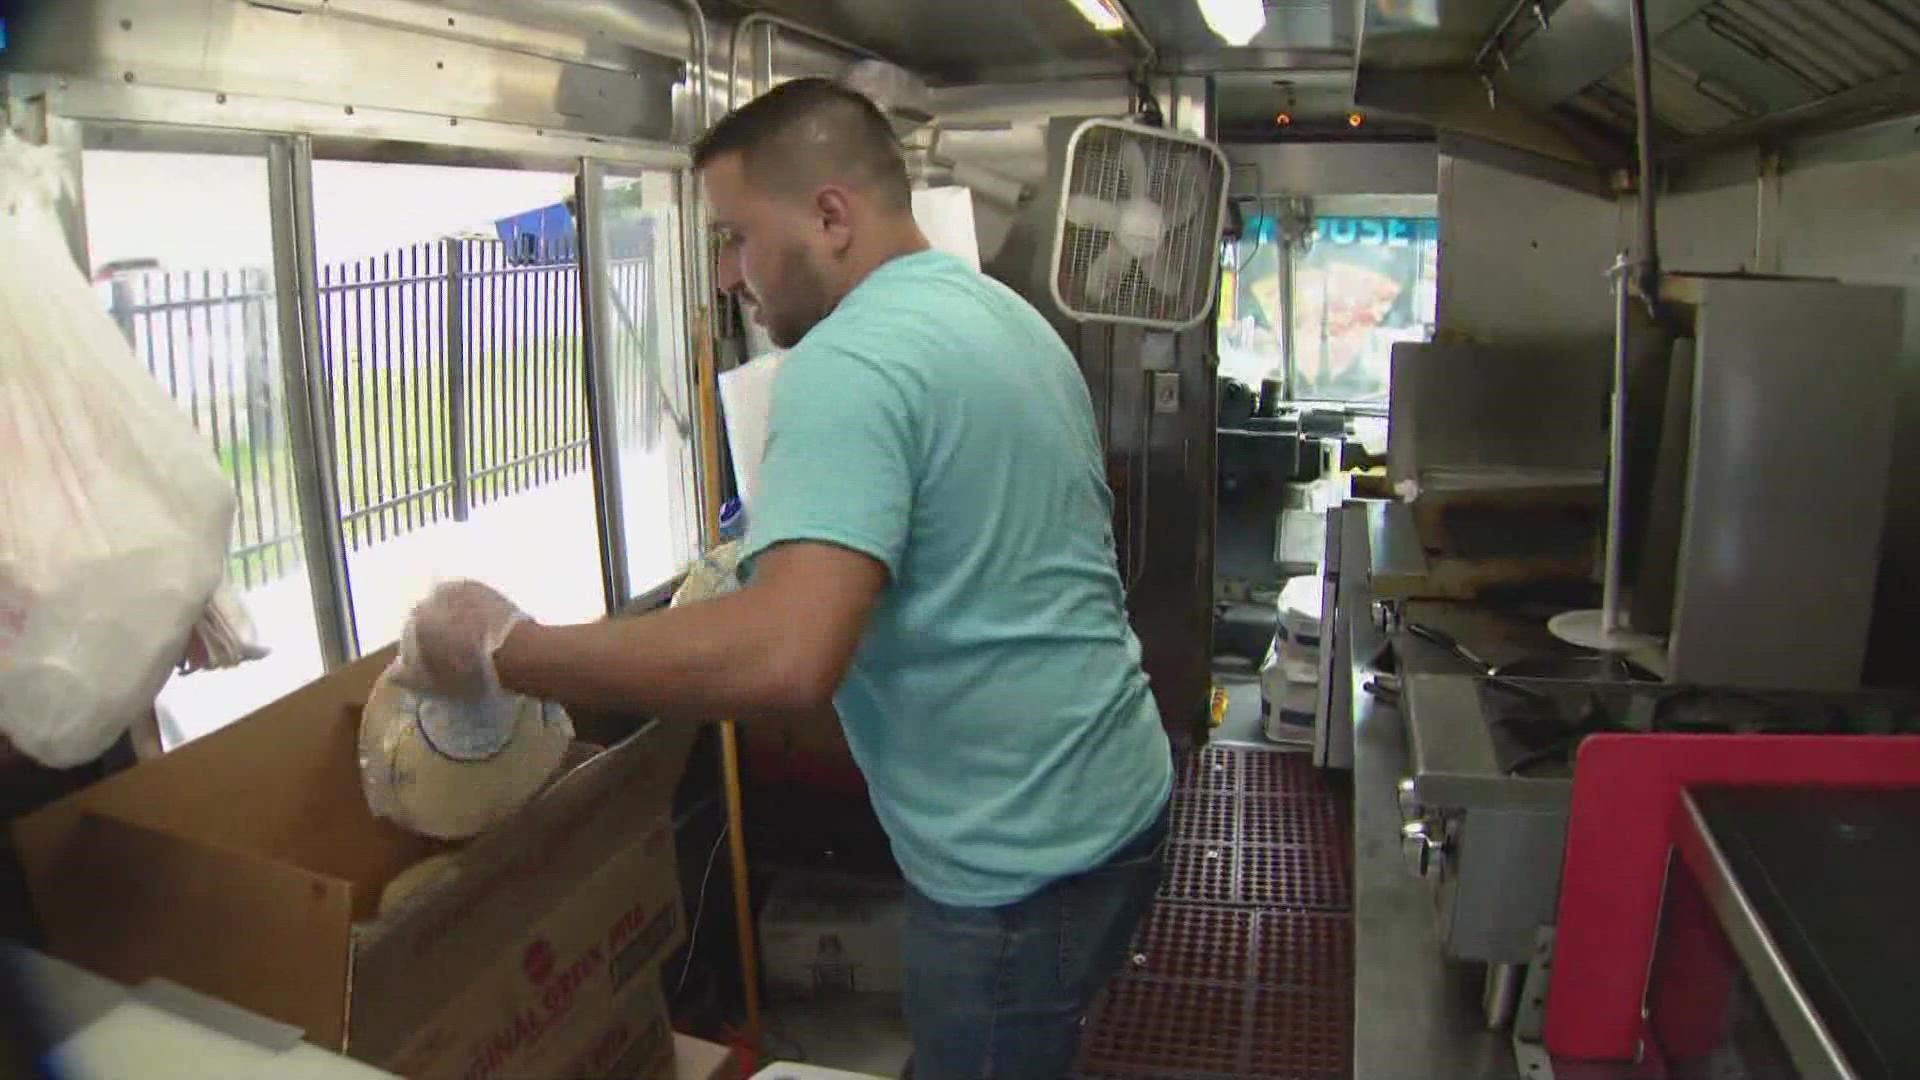 Denver food truck owners are angry and worried about their businesses after the city banned food trucks on some of LoDo's busiest streets.